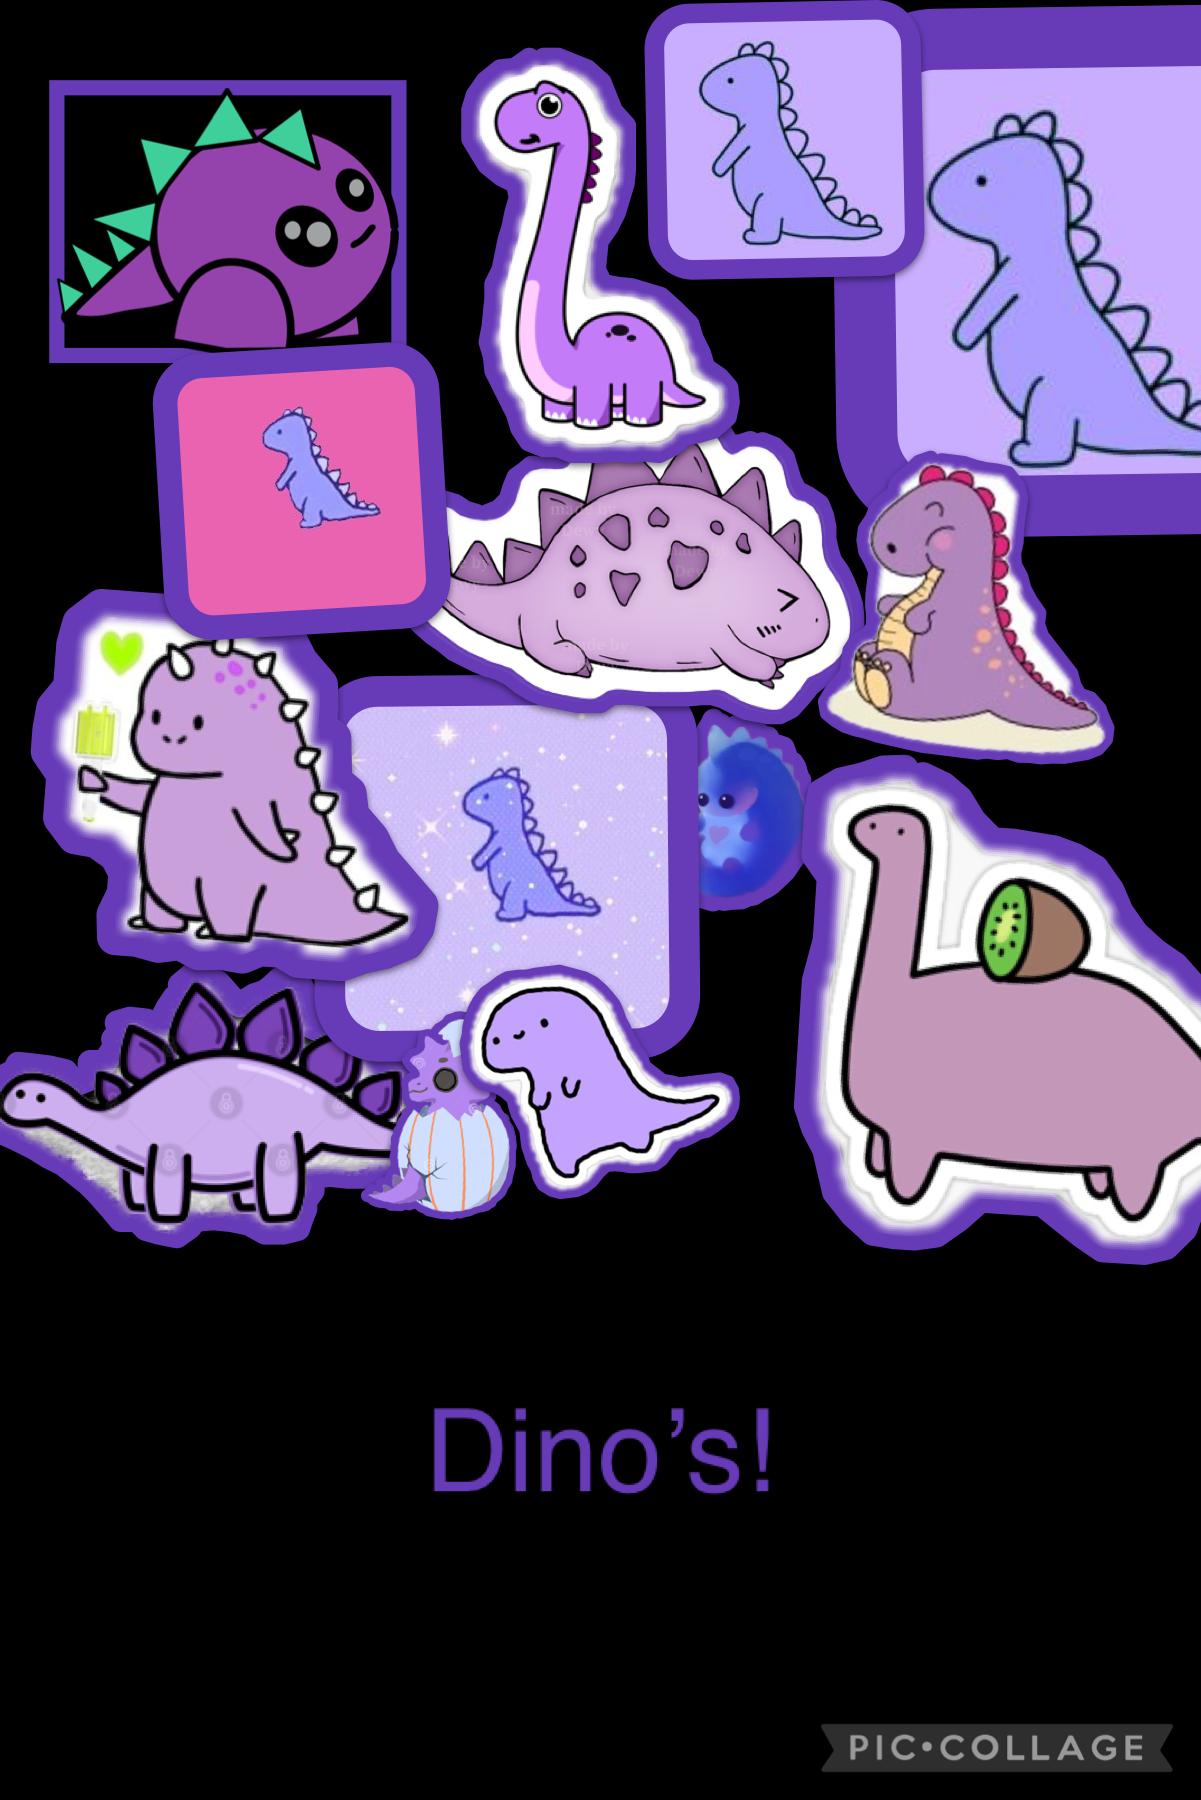 🦖tap🦖

Sry it’s not the best tell me if you prefer my previous style better!